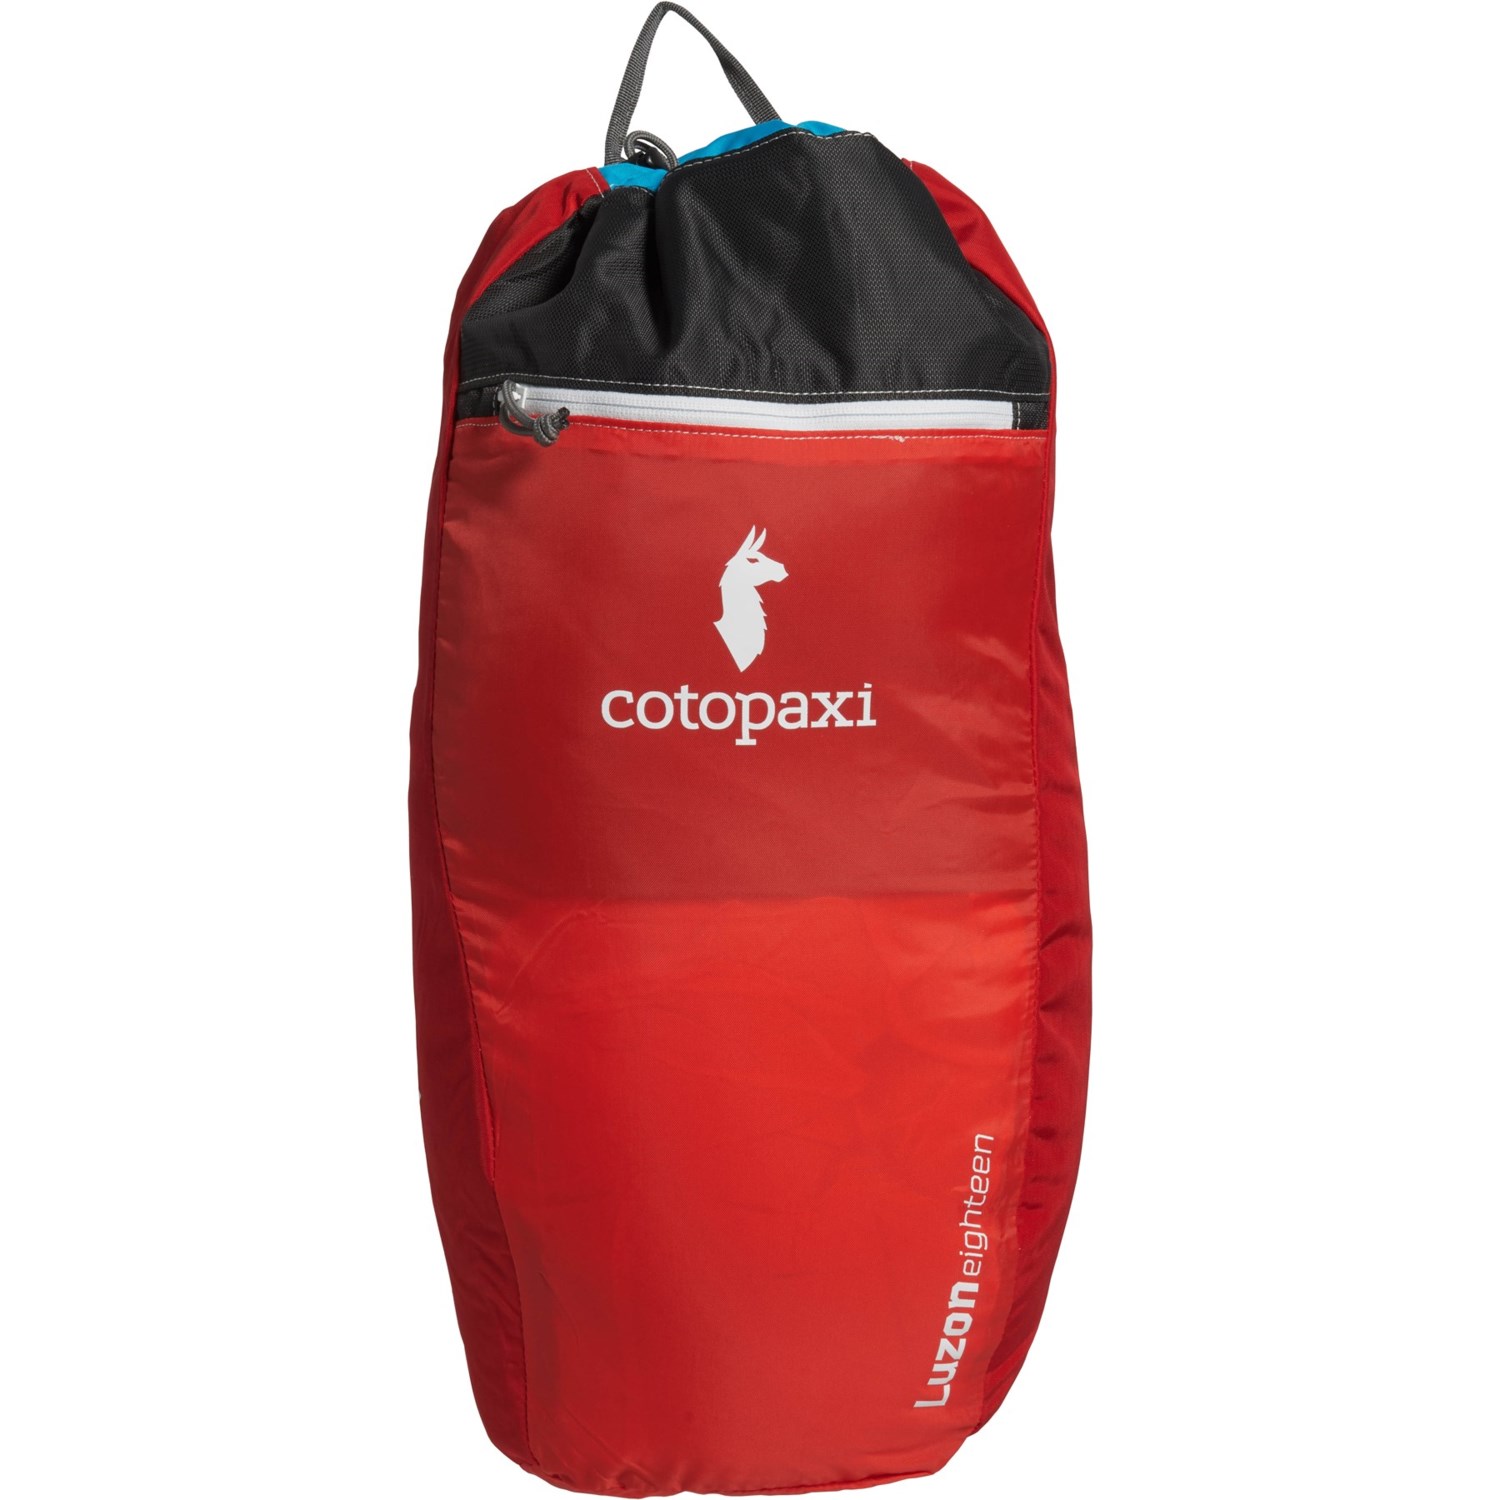 Cotopaxi 18L Luzon Backpack - Save 37%